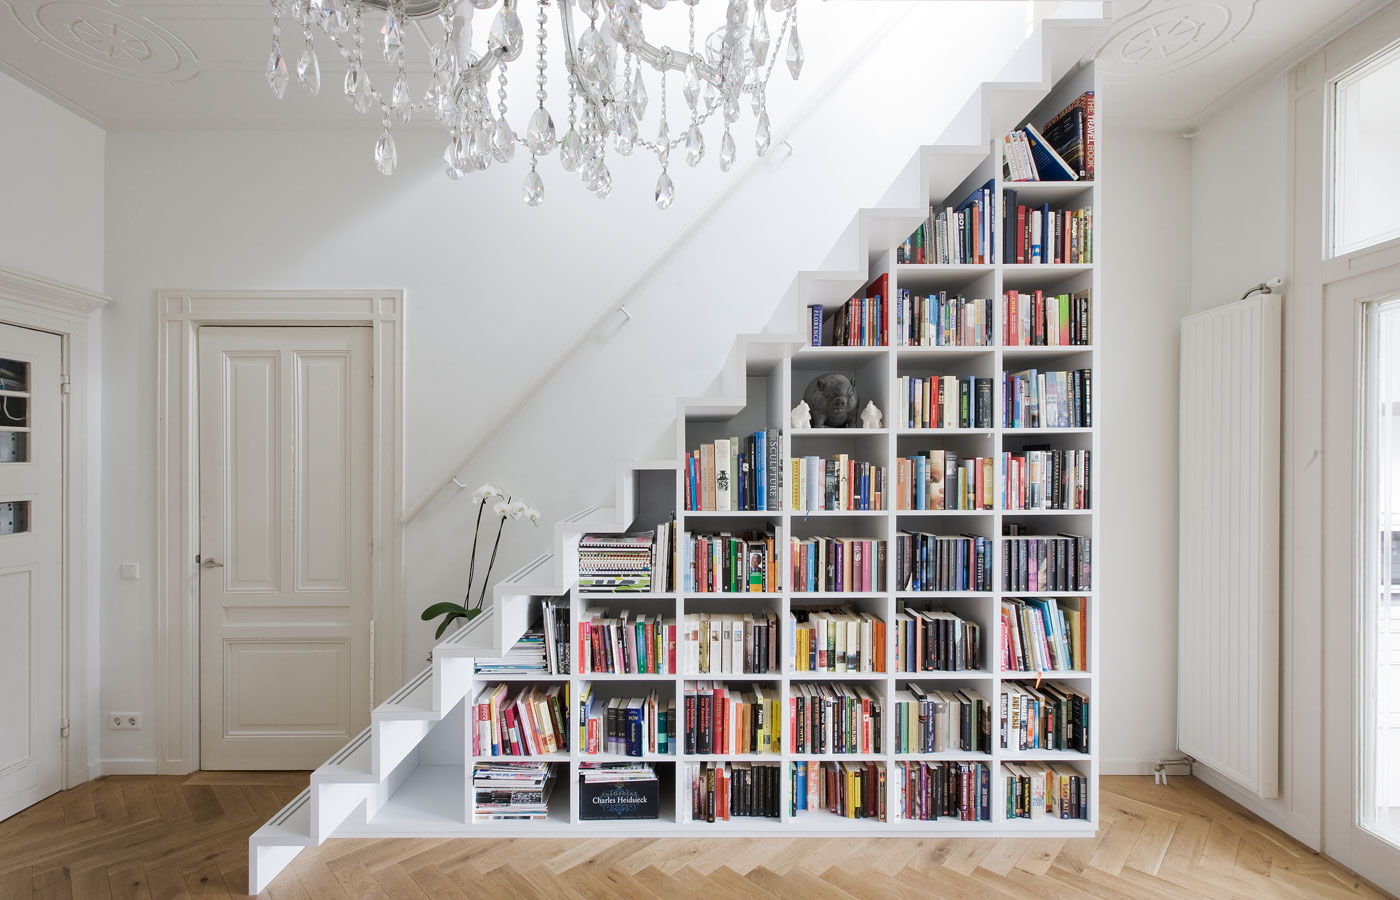 A DIY bookcase in a staircase is one of many creative book storage hacks for small apartments.